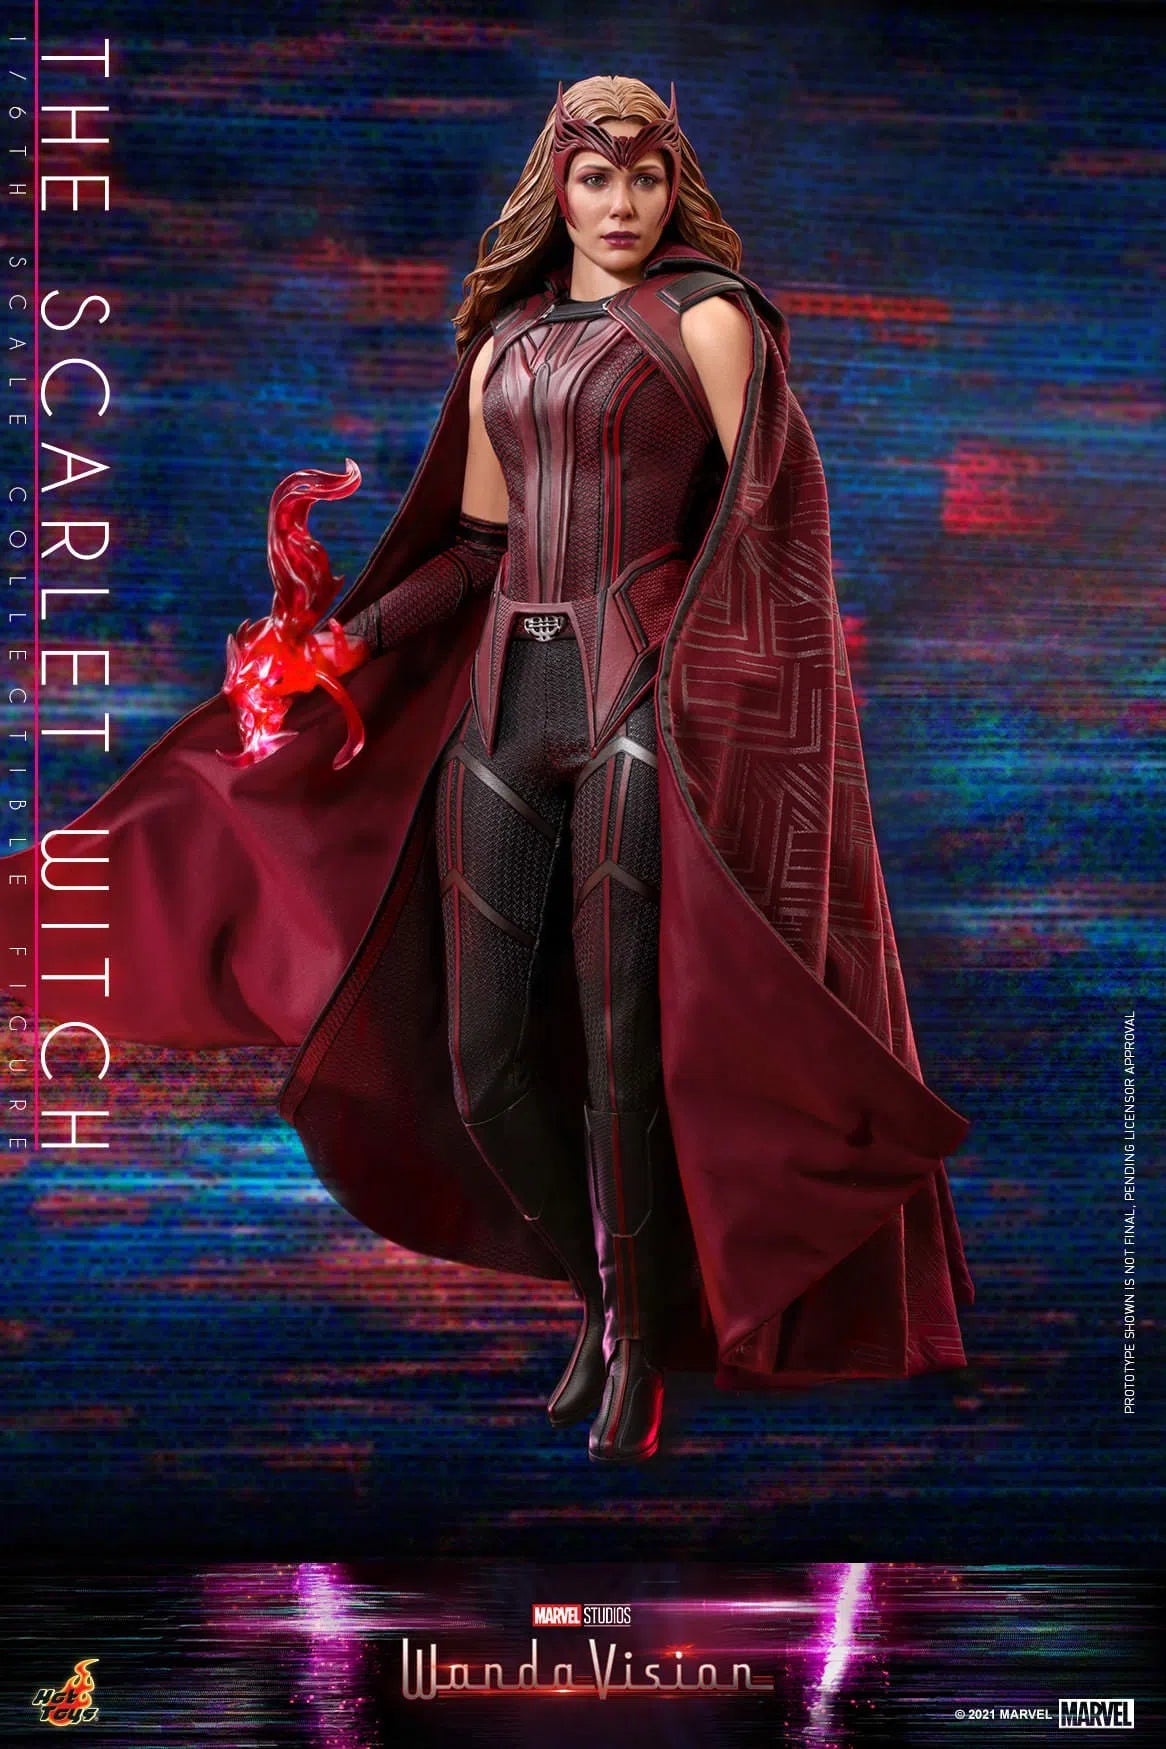 The Scarlet Witch: WandaVision: TMS036